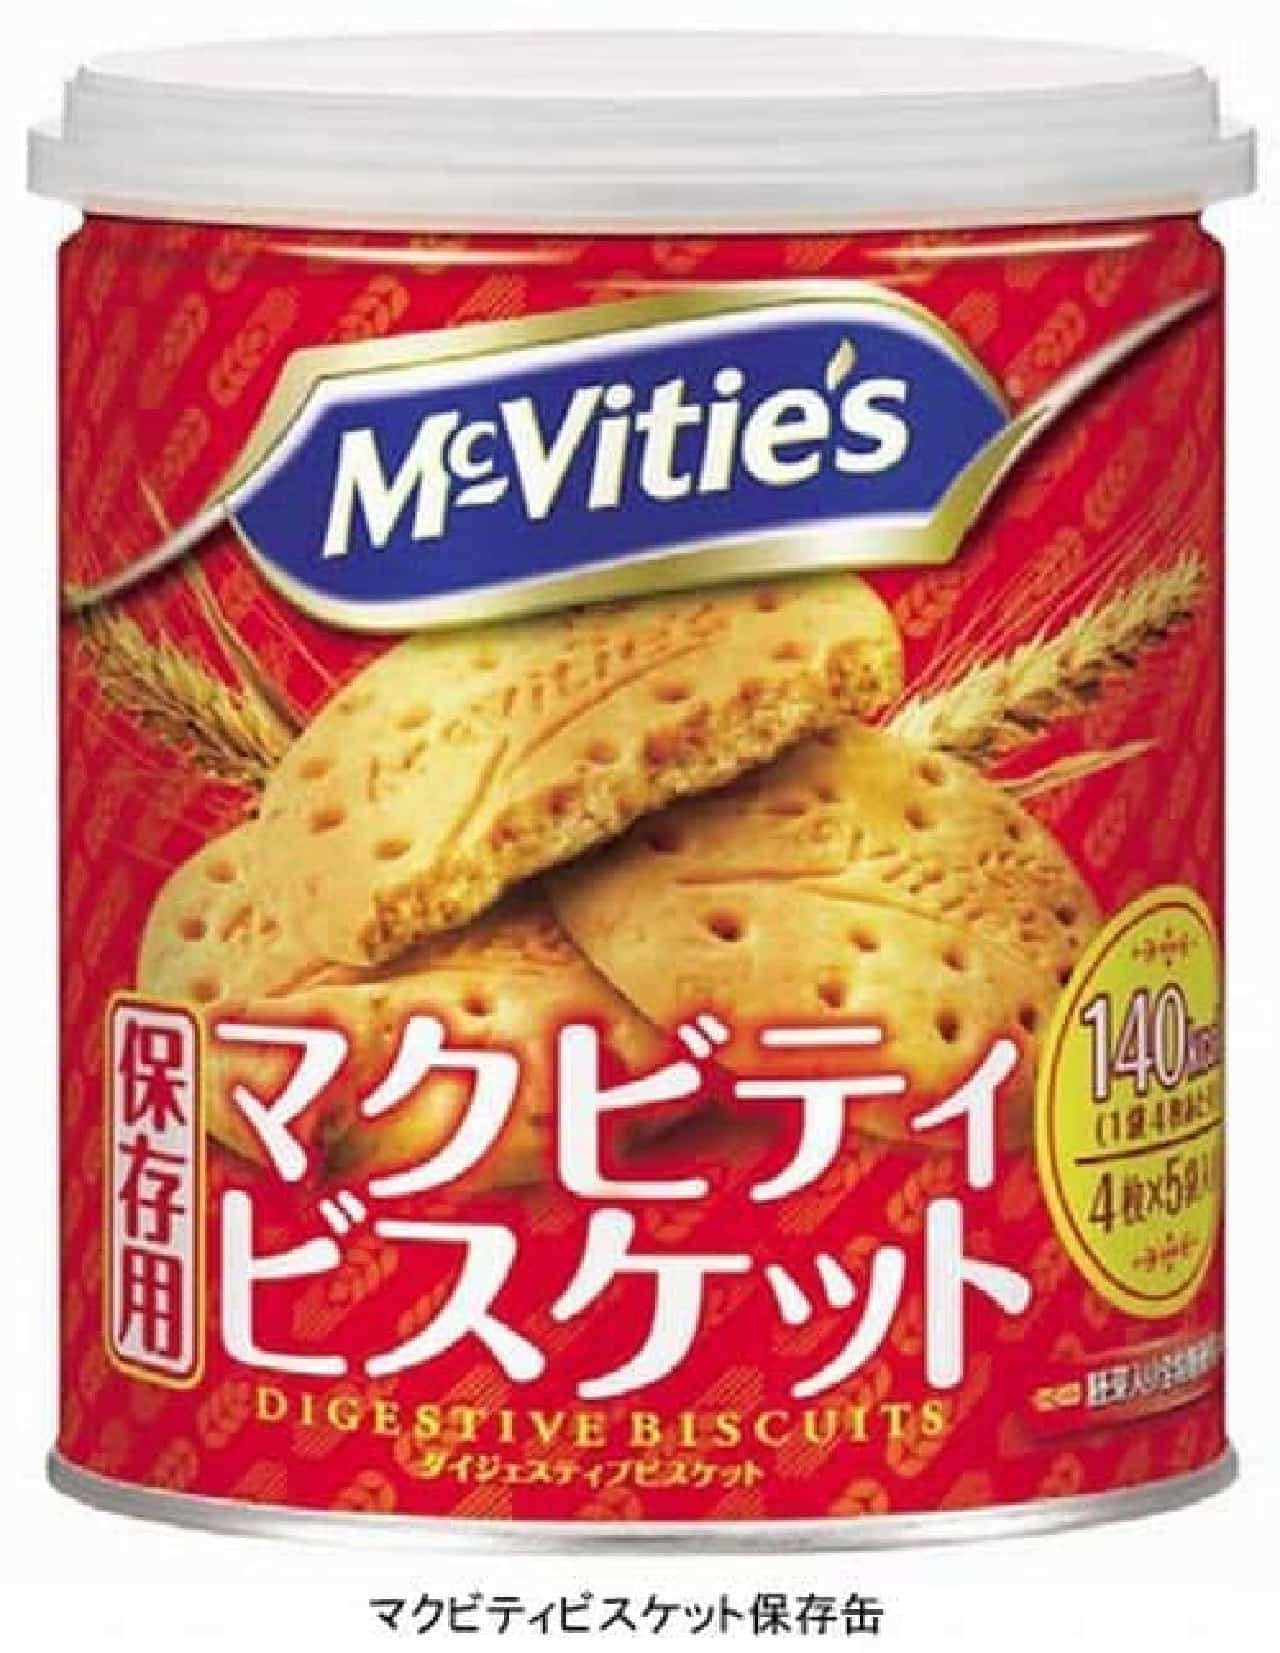 McVitie's biscuit storage can, best-by date 3 years